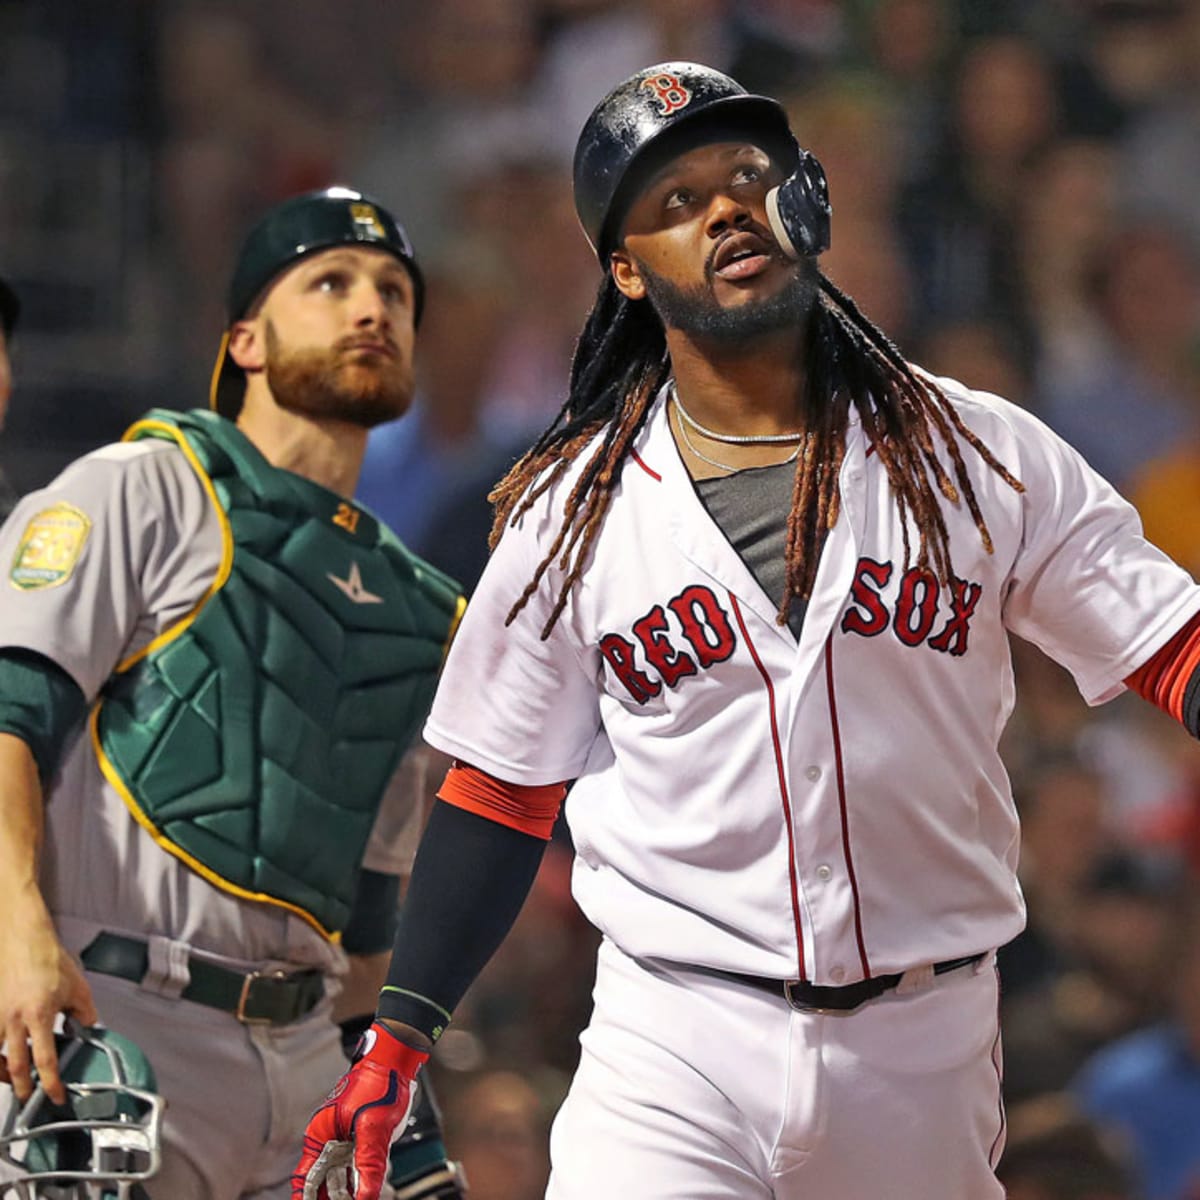 The Red Sox lost patience with the underwhelming Hanley Ramirez